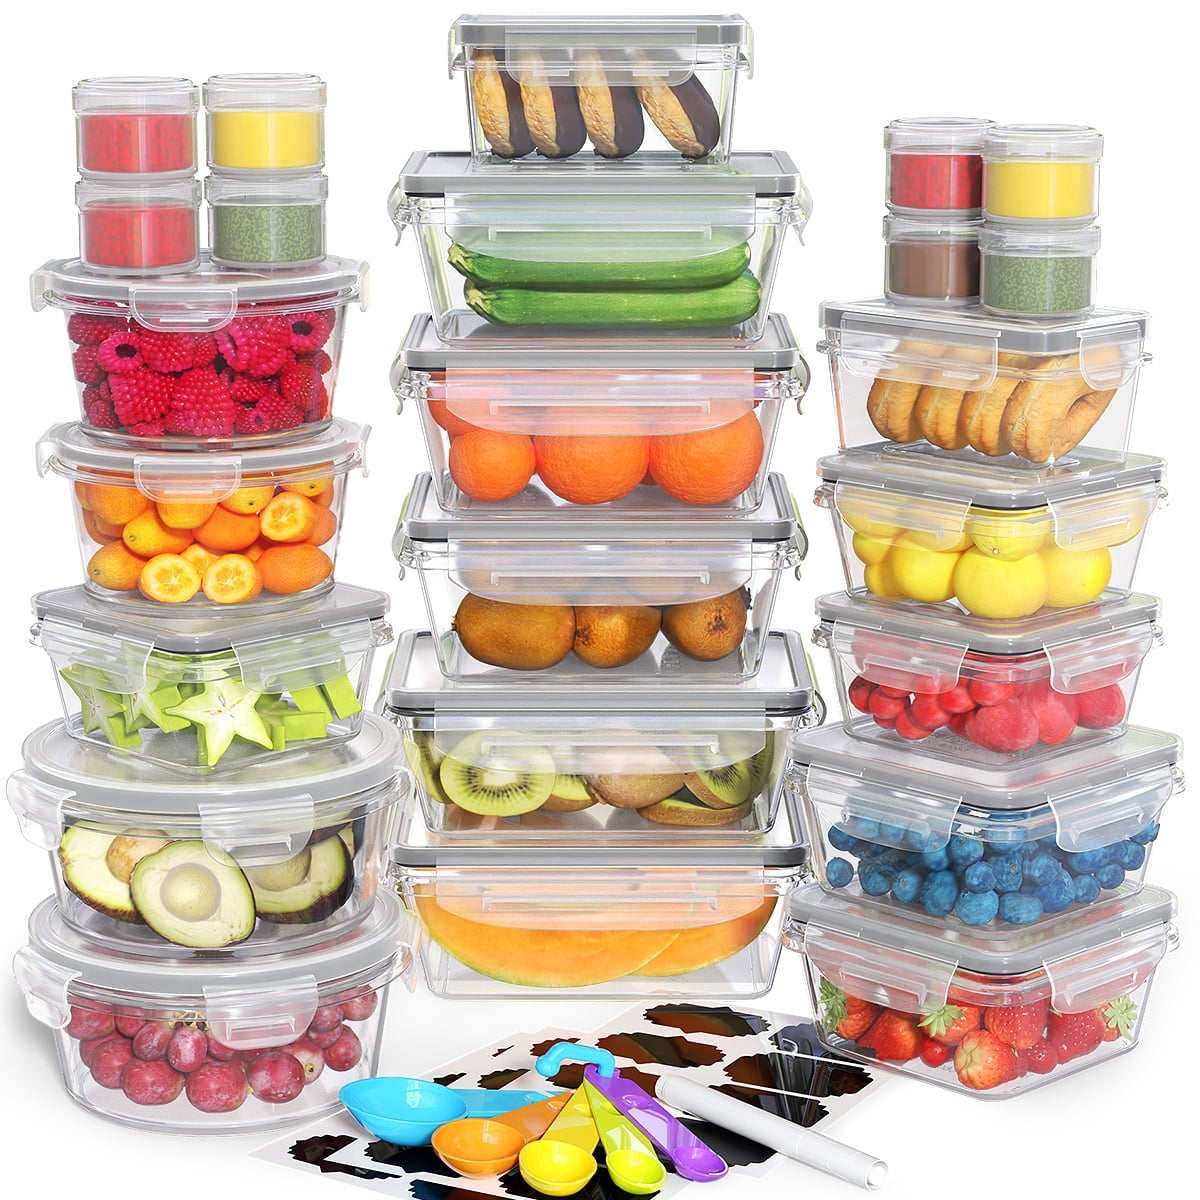  KEMETHY 40 Pcs Food Storage Containers with Lids Airtight (20  Containers & 20 Lids), Plastic Meal Prep Container for Pantry & Kitchen  Organization, BPA-Free, Leak-Proof with Labels & Marker Pen: Home